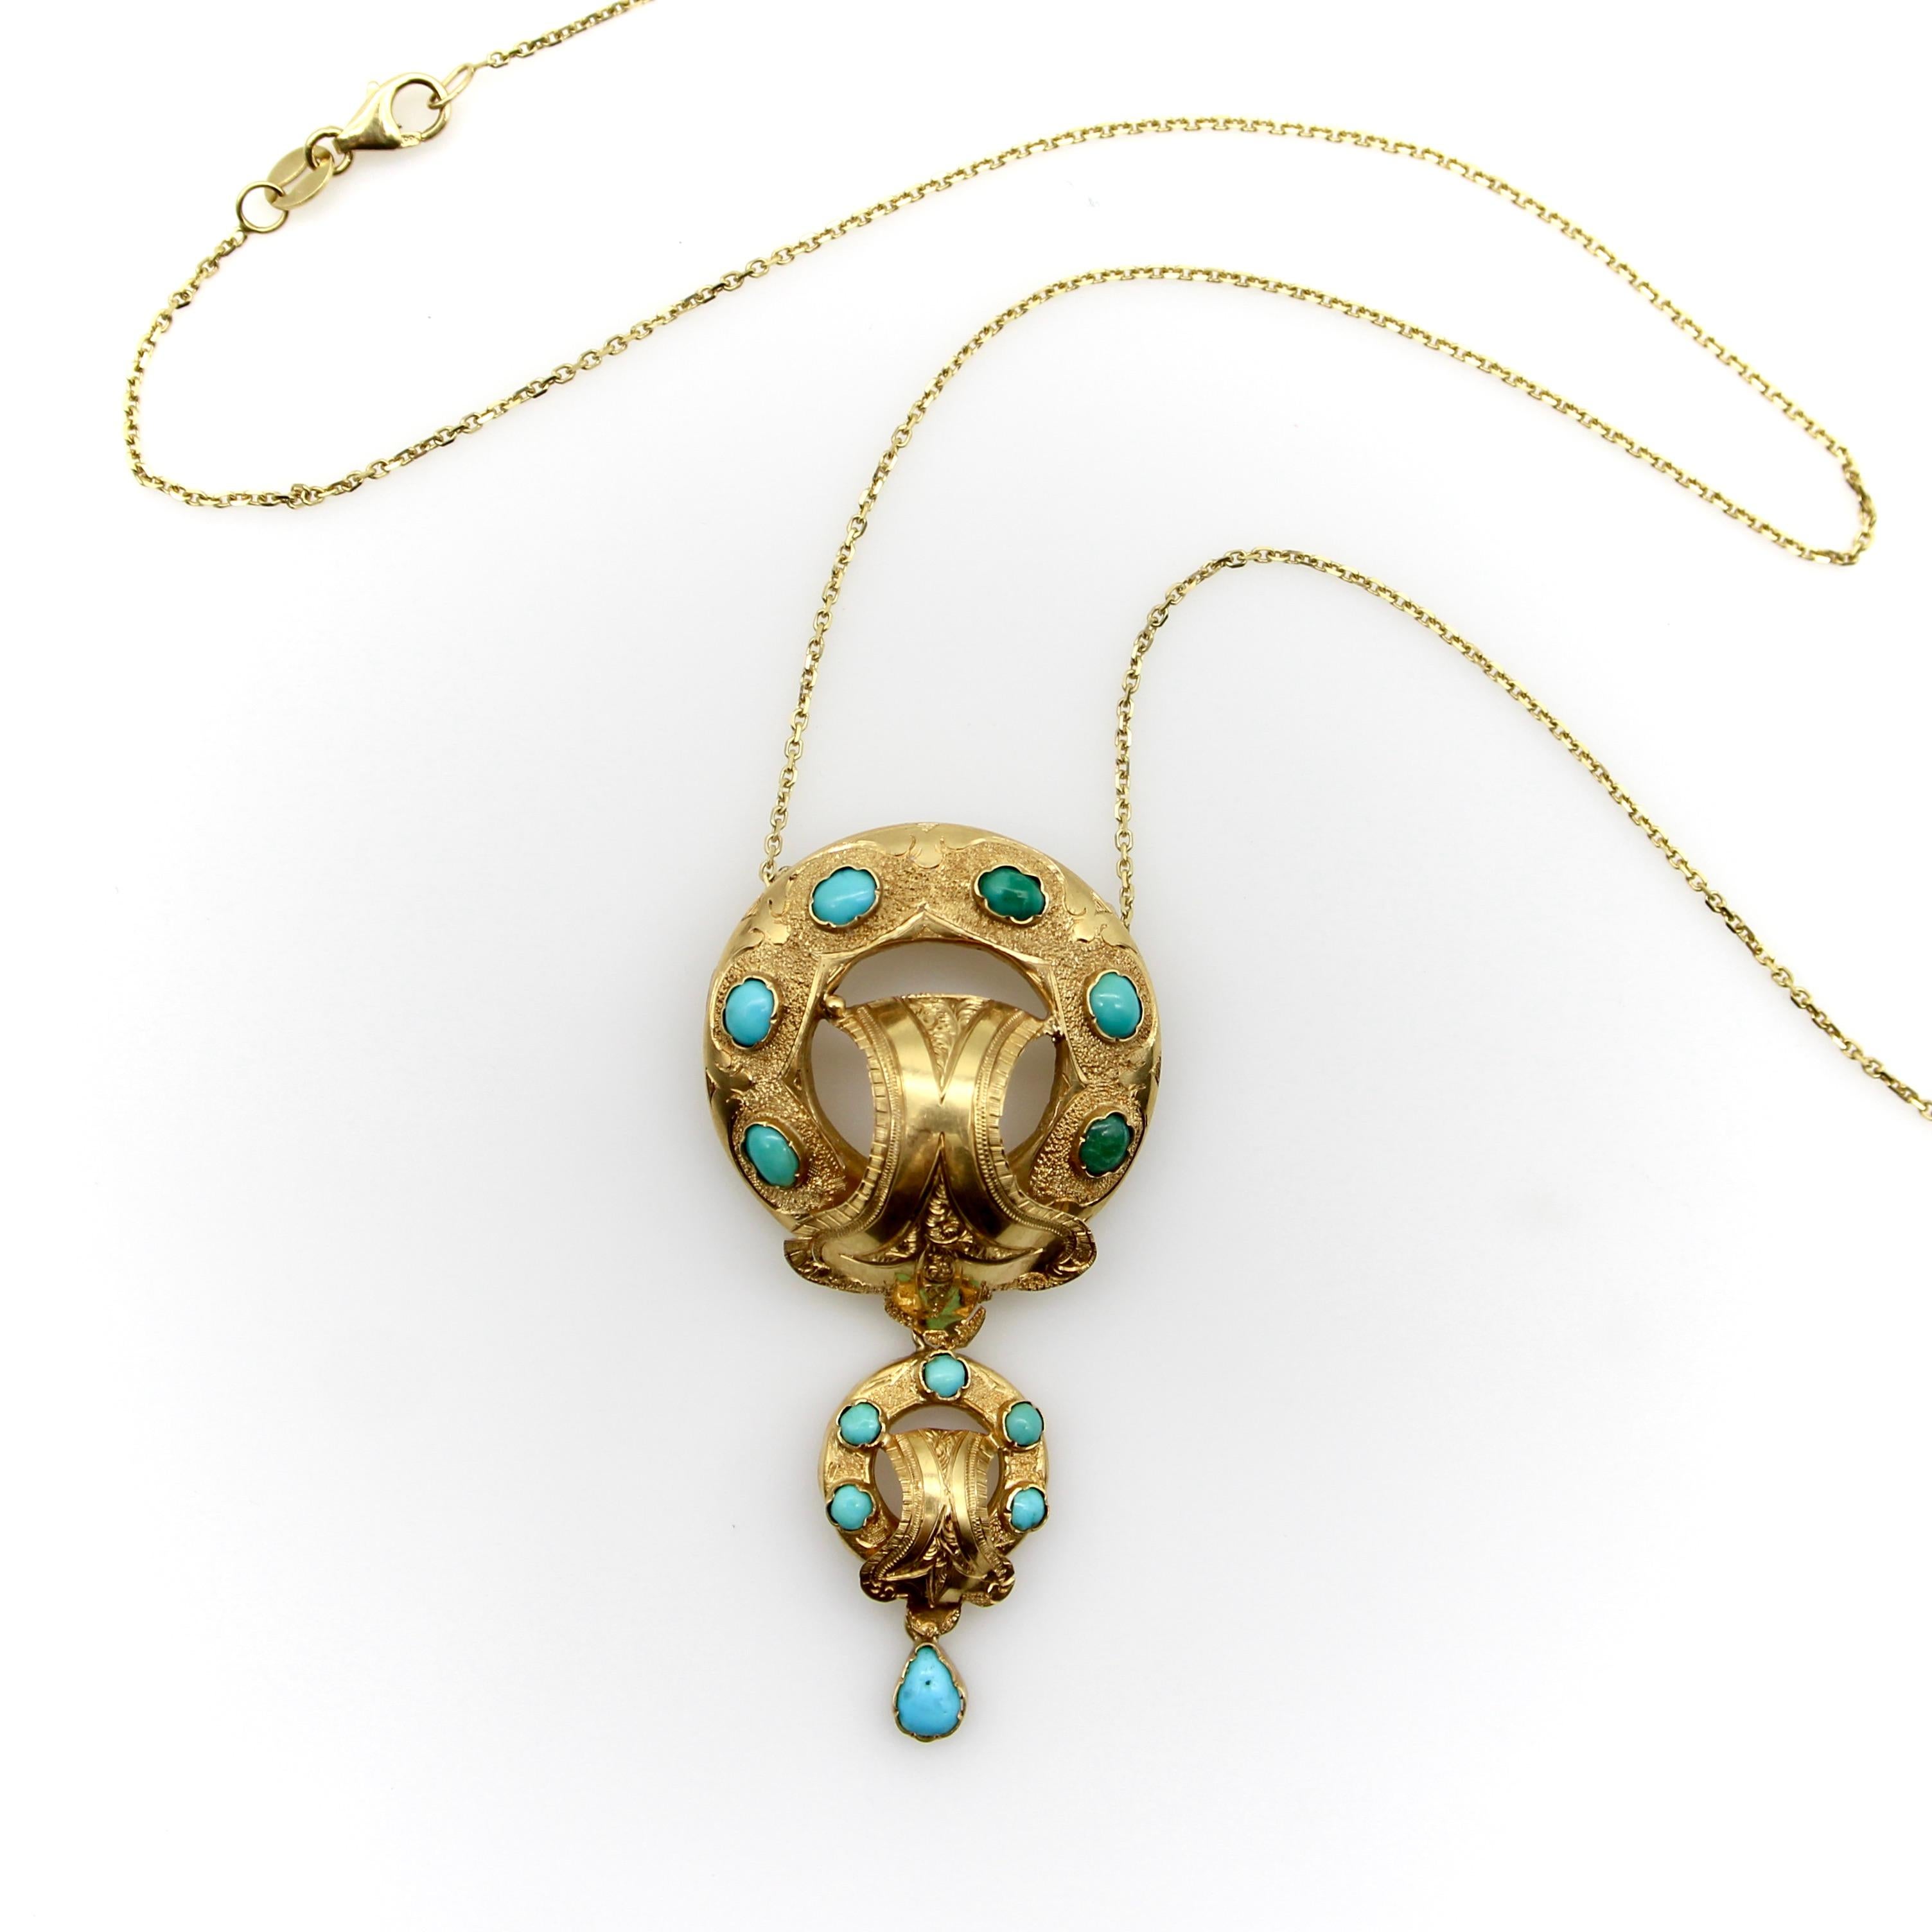 Victorian Etruscan Revival 14K Gold and Turquoise Cabochon Necklace In Good Condition For Sale In Venice, CA